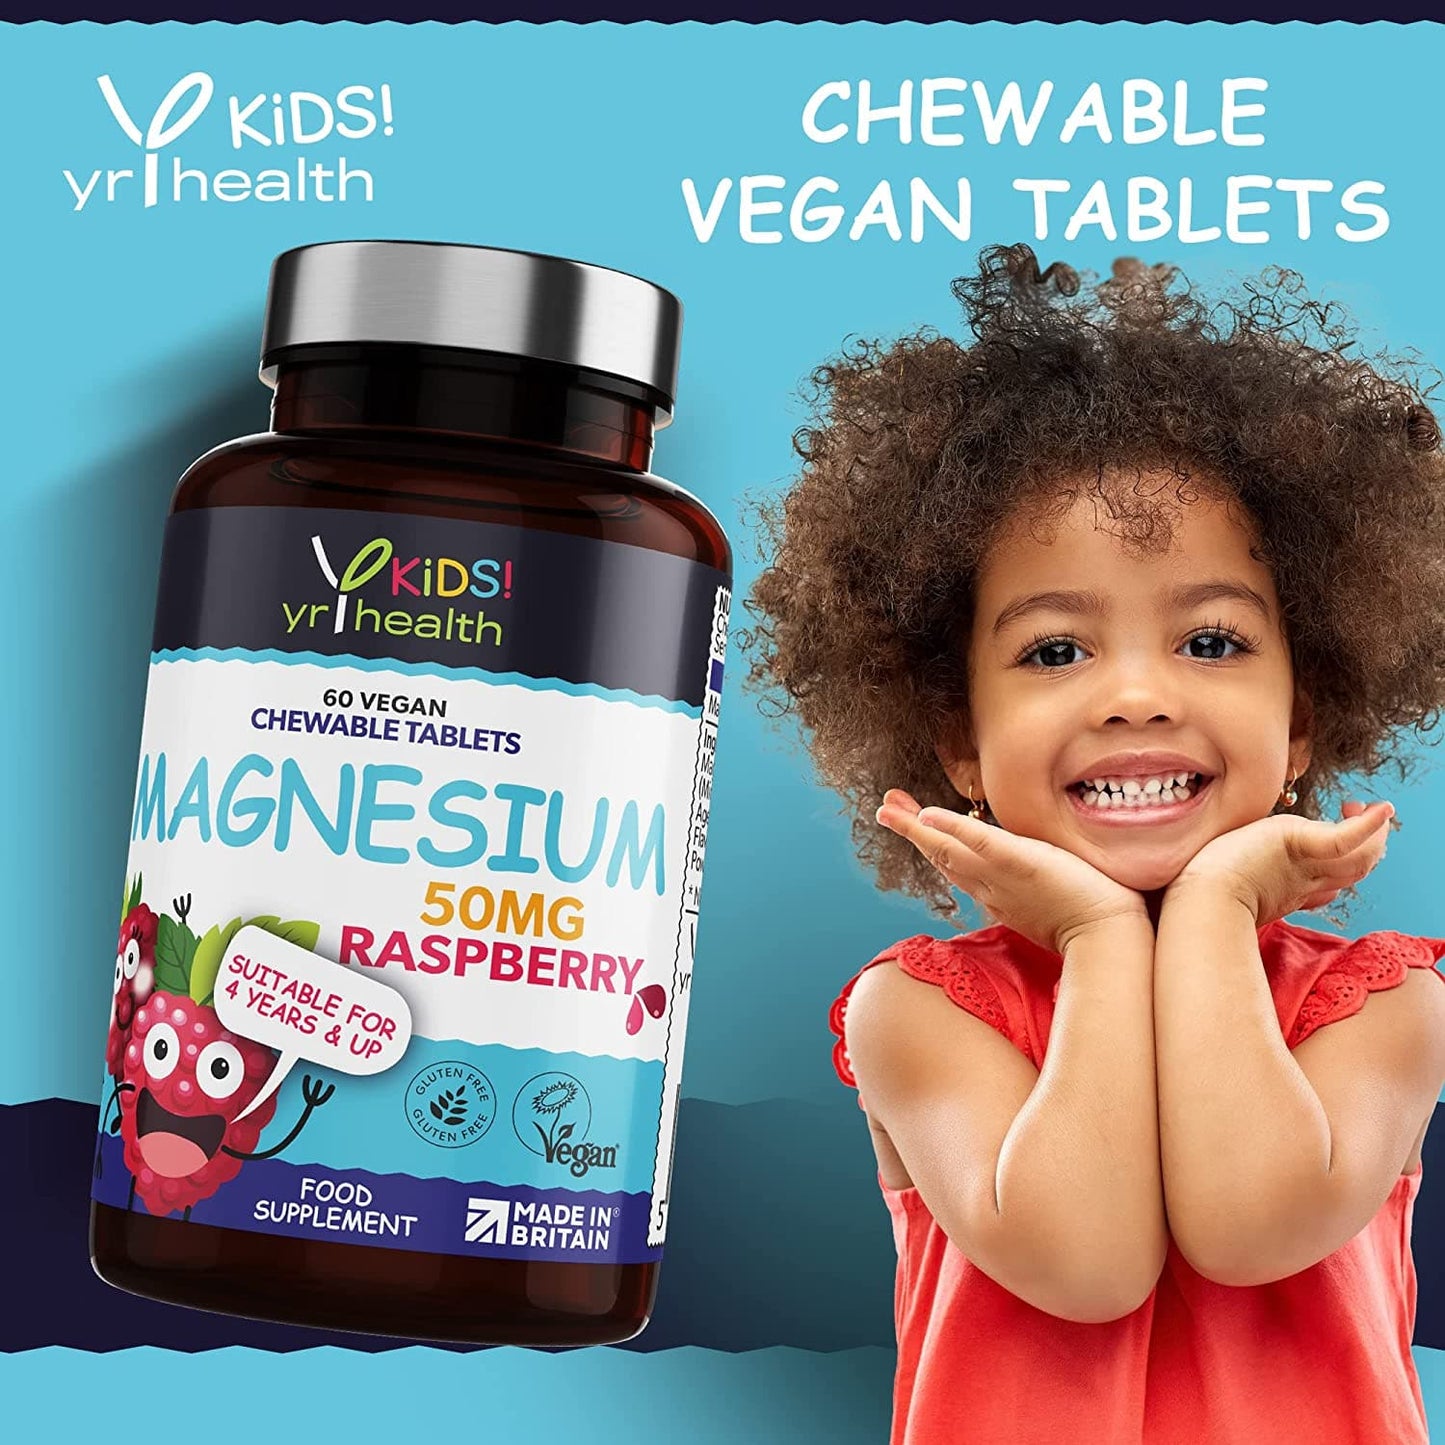 Load image into Gallery viewer, Kids Magnesium Tablets for Sleep, Anxiety and Ticks, 50mg Chewable Raspberry Flavour Magnesium for Kids, Vegan Society Registered Tablets not Gummies, 2 Months Supply
